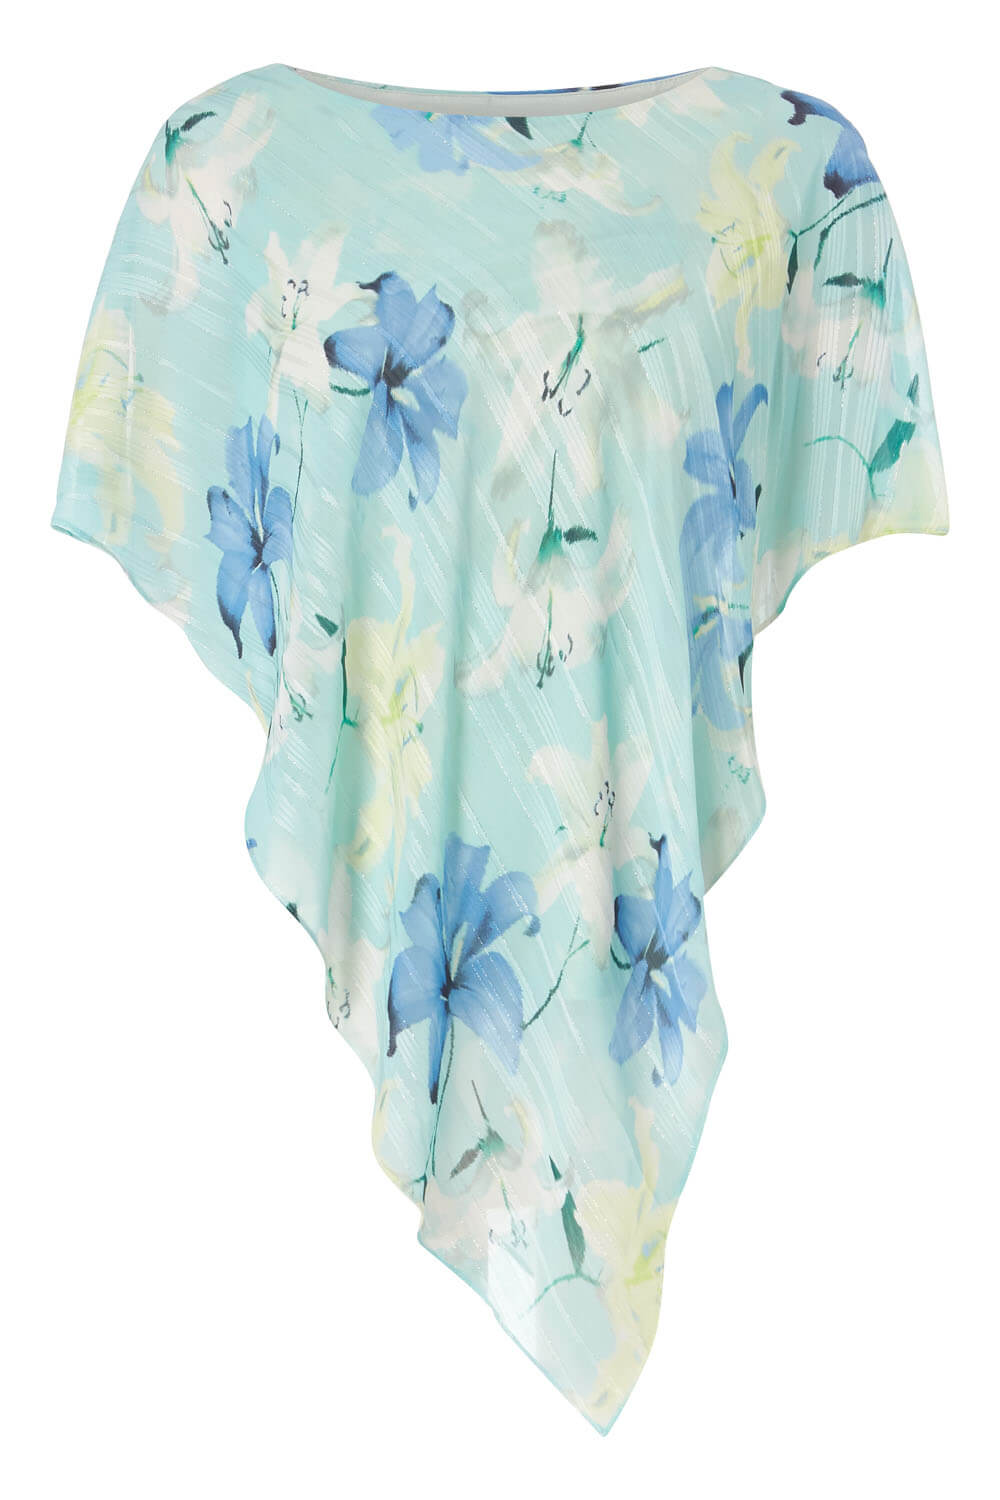 Mint Floral Print Asymmetric Overlay Top, Image 5 of 5